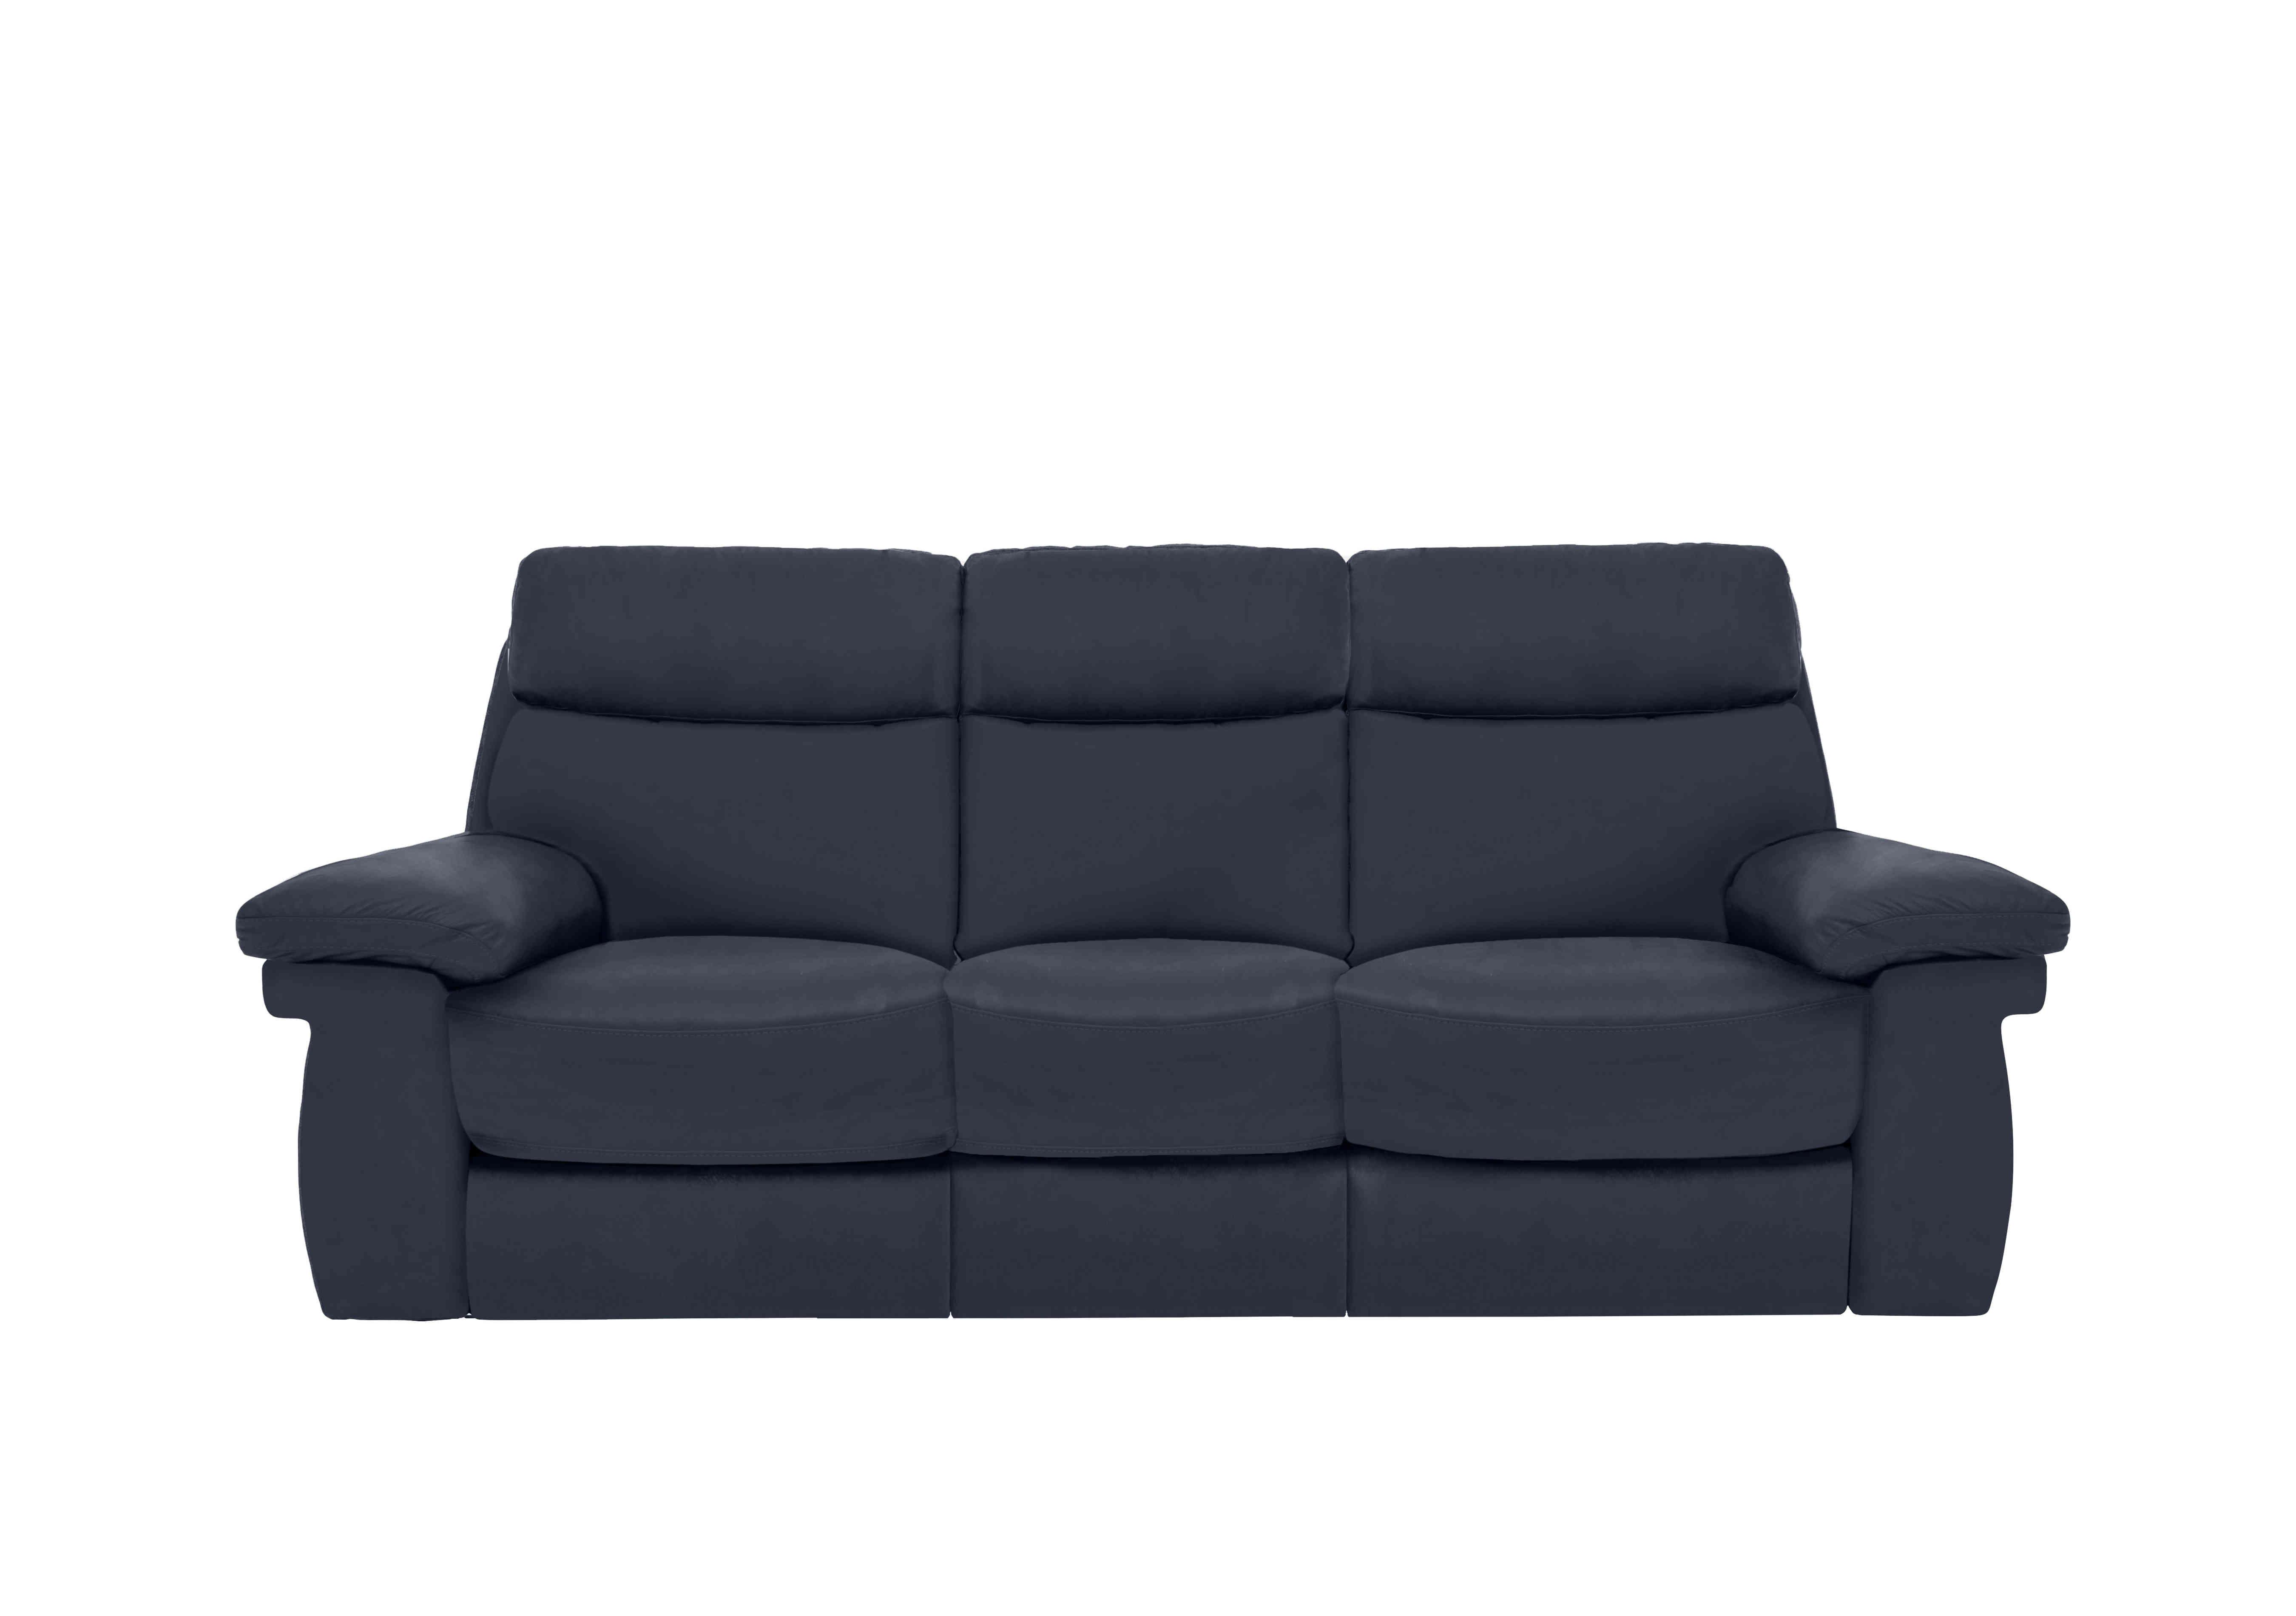 Serene 3 Seater Leather Sofa in Bx-036c Navy on Furniture Village